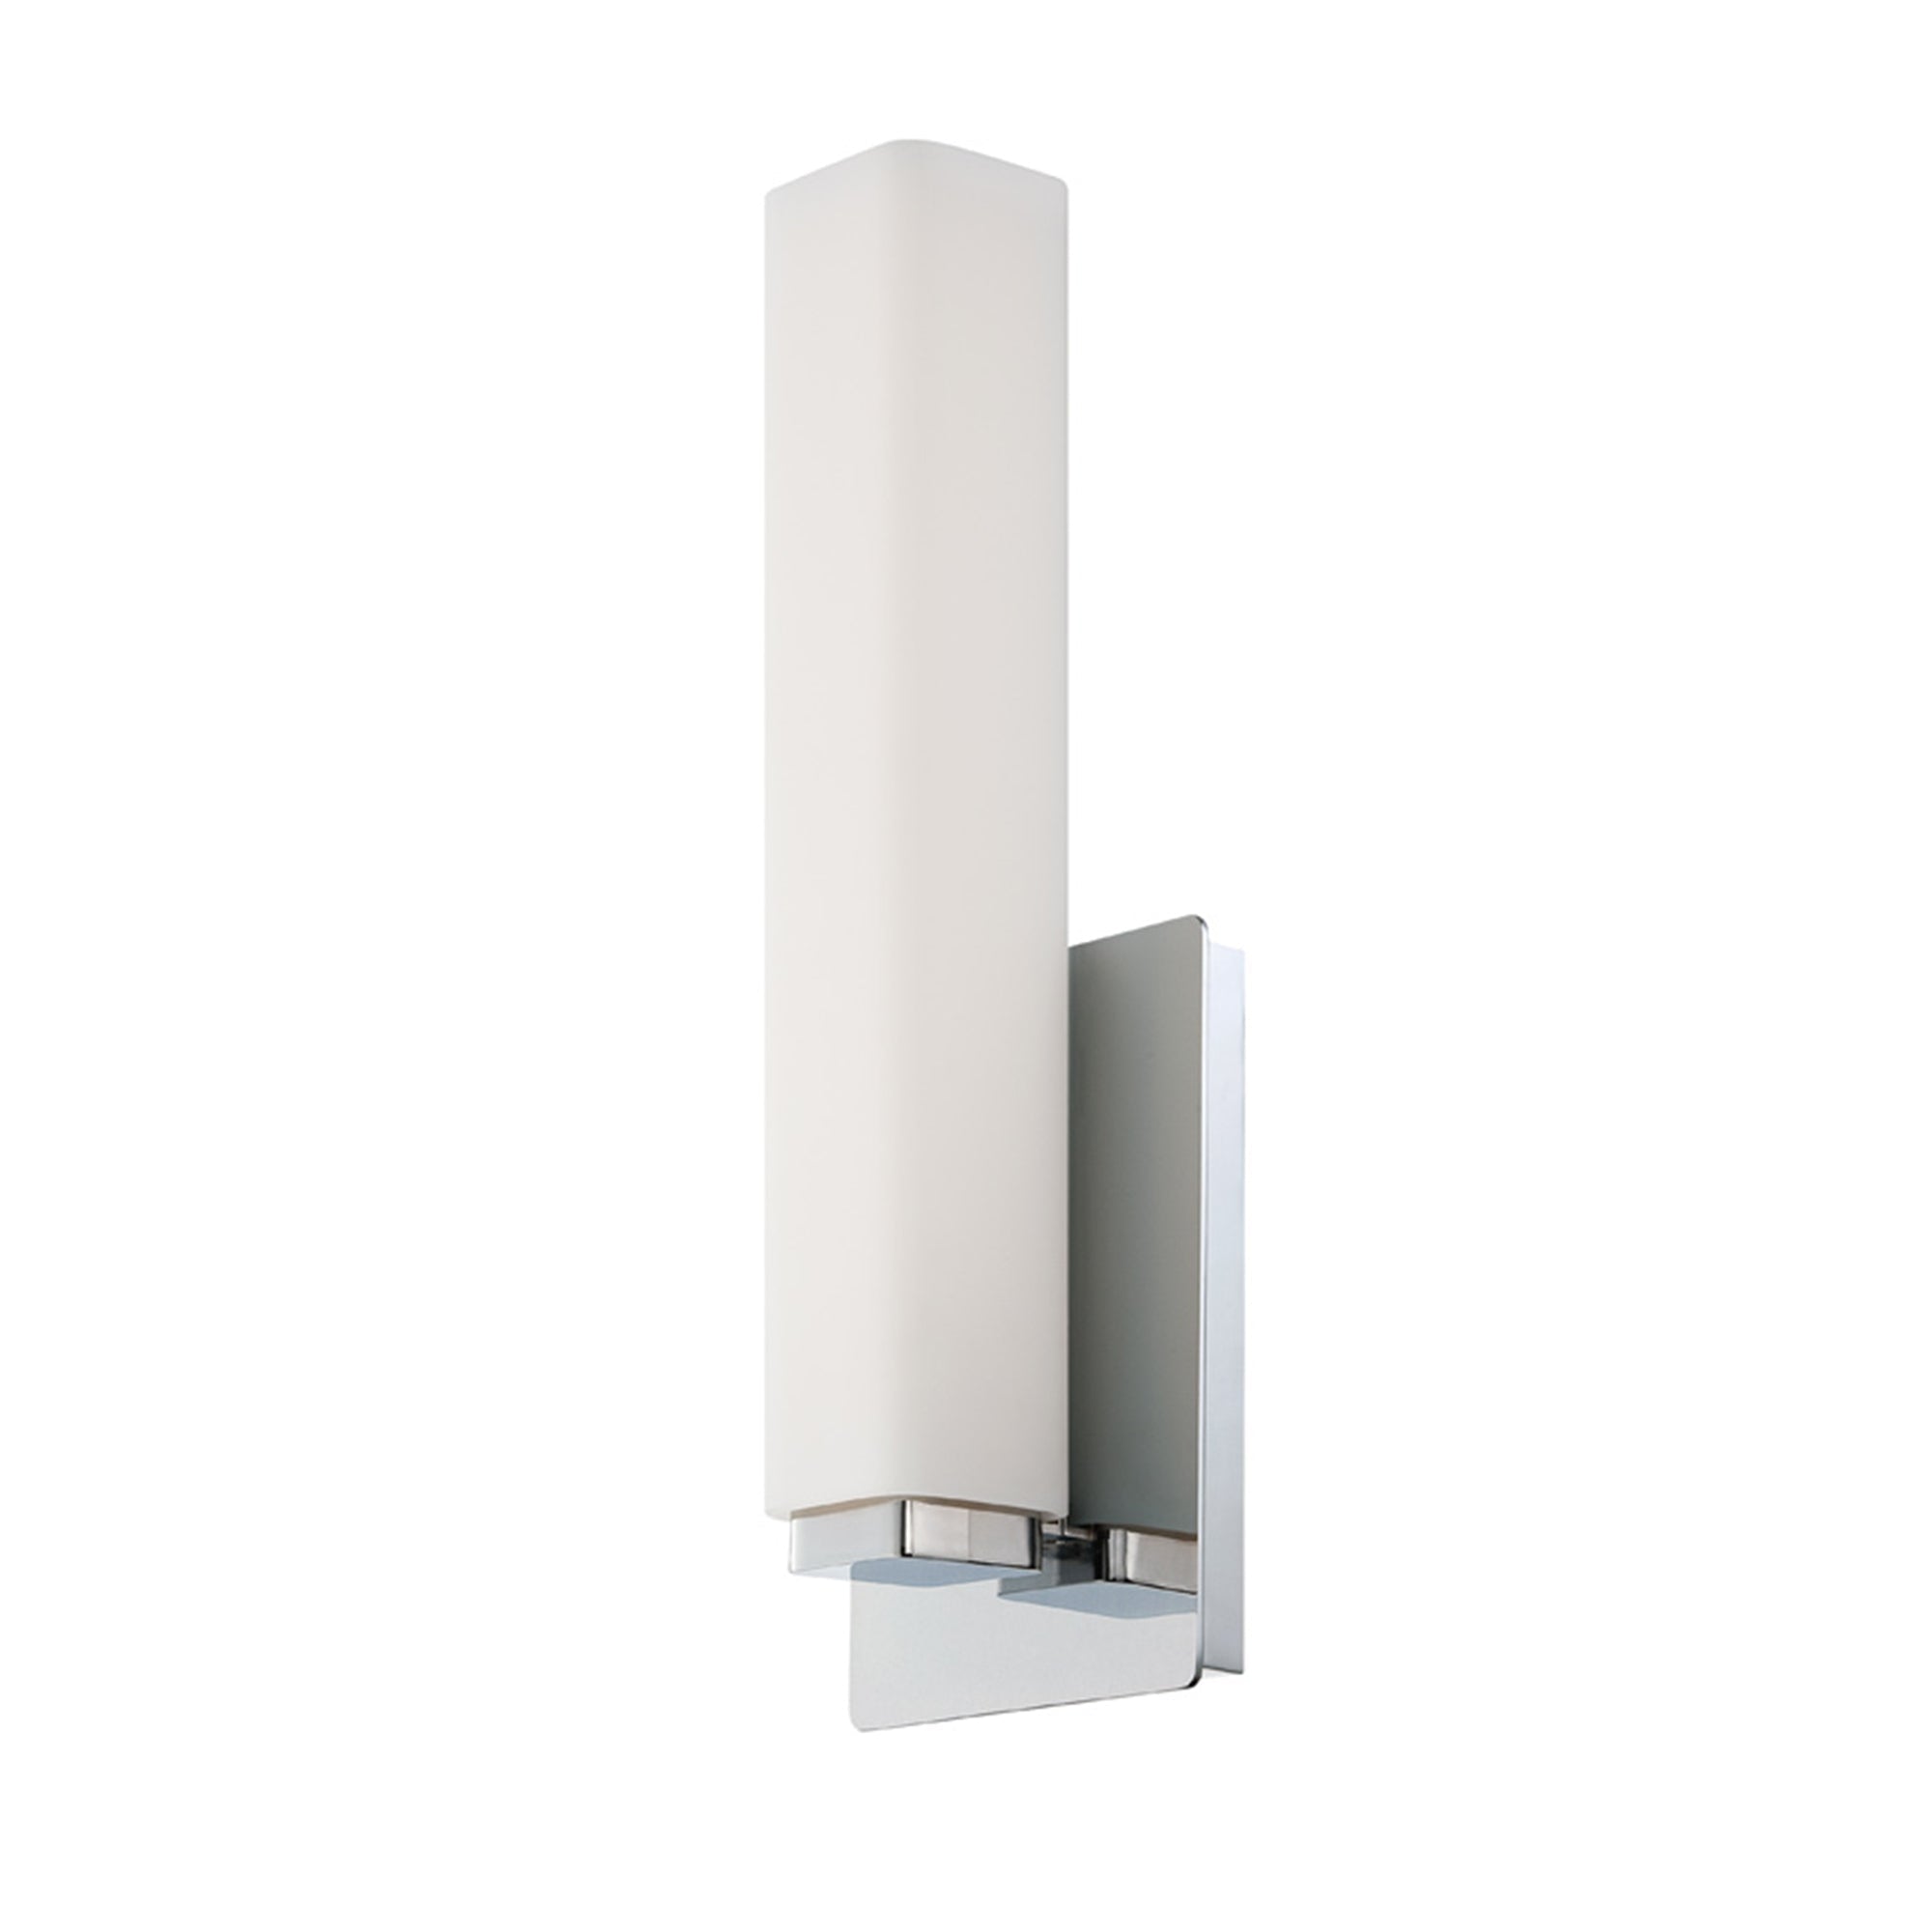 Vogue 15" LED Wall Sconce